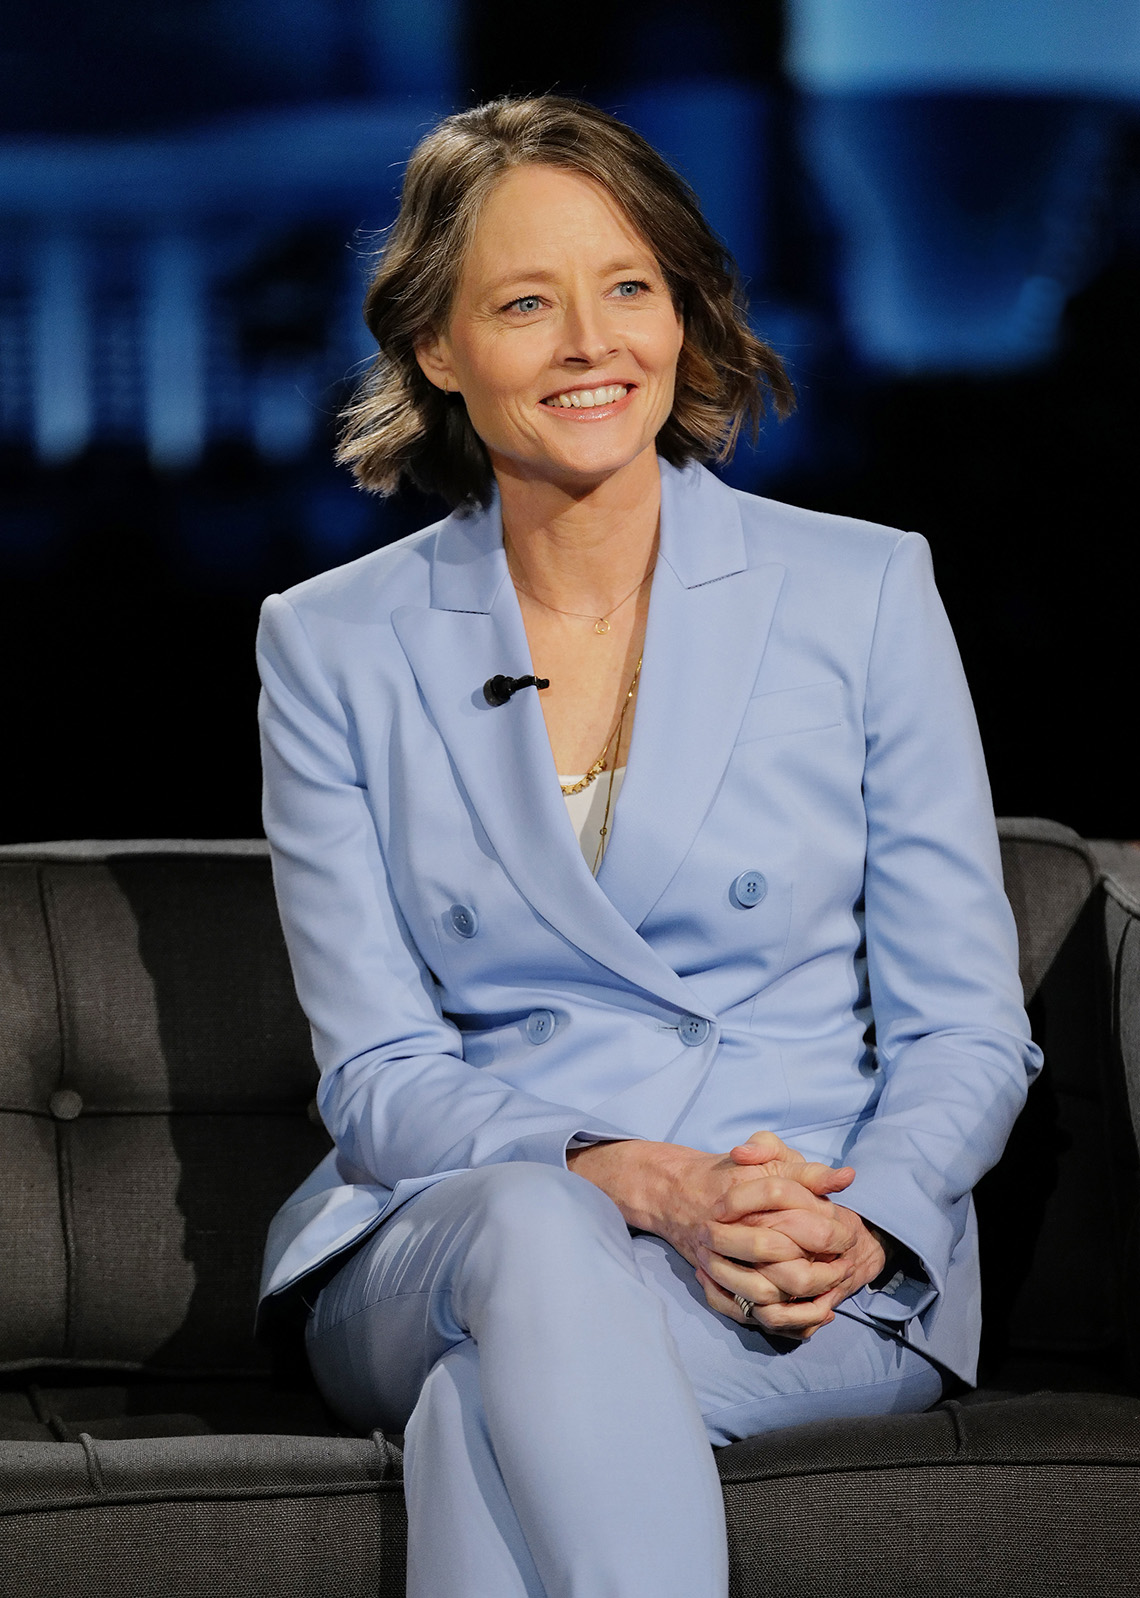 Jodie Foster on 'The Mauritanian' and Career Resurgence